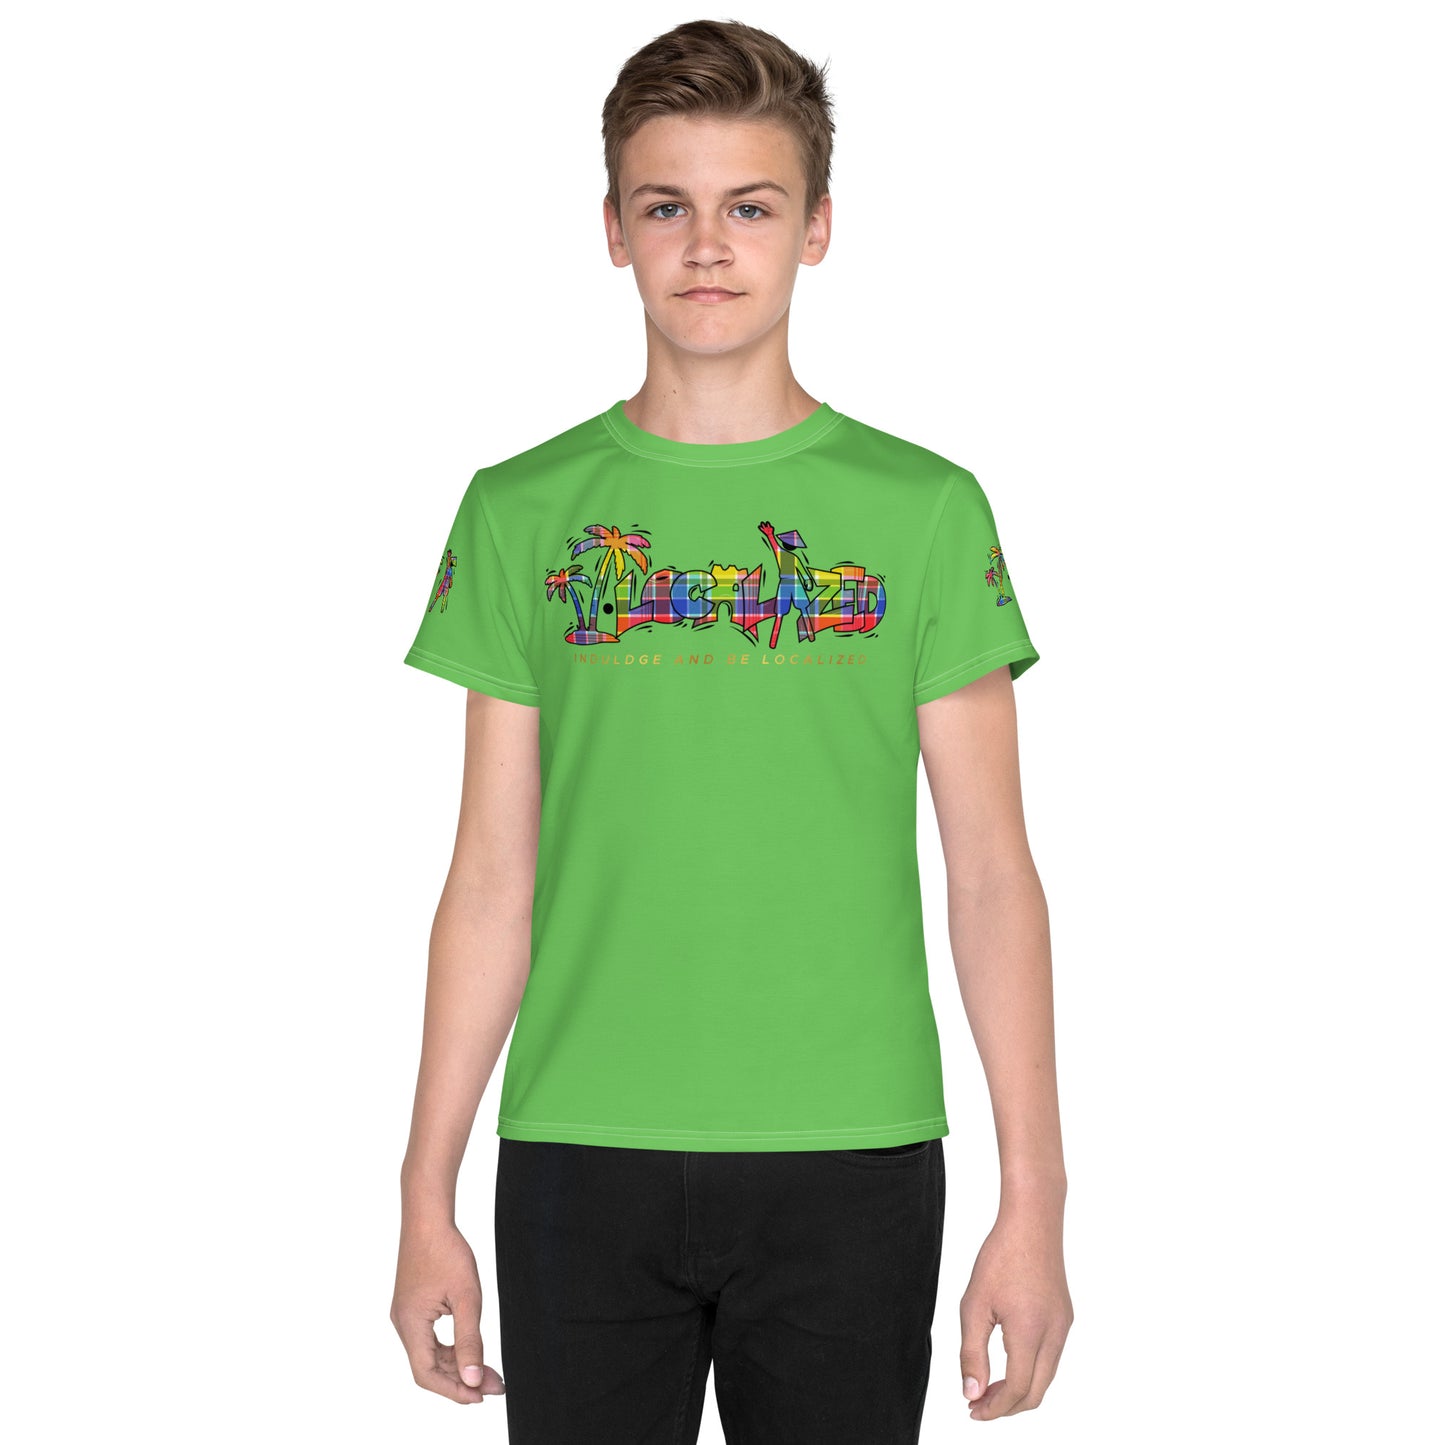 Green V.Localized (Madras) Youth Dry-Fit T-Shirt